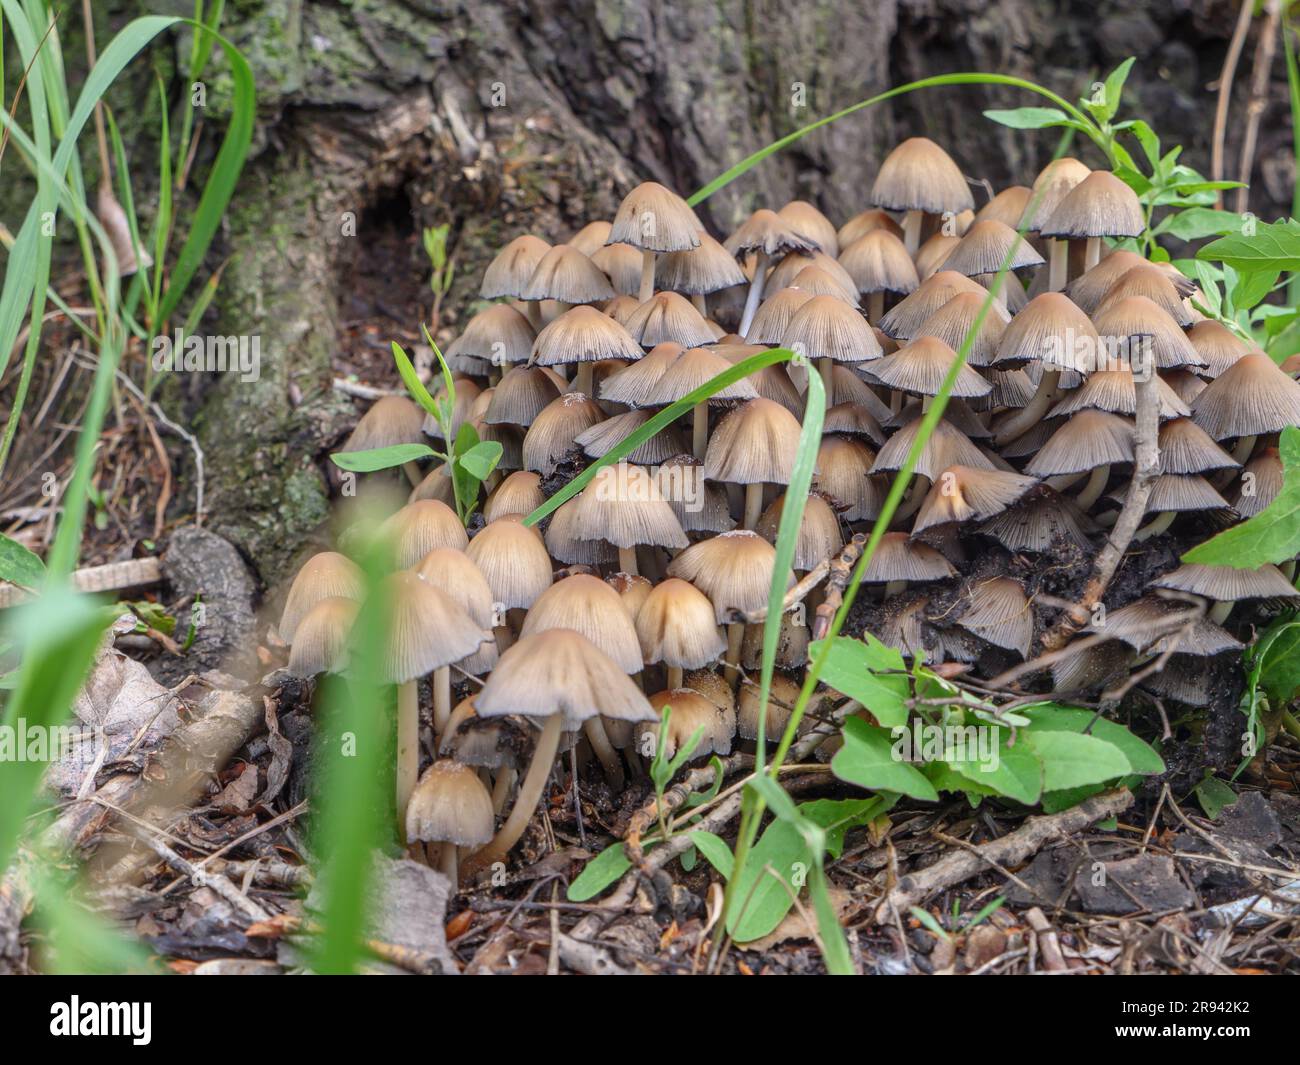 A large cluster of Sulphur Tuft (Hypholoma fasciculare) poisonous mushrooms with hemispherical caps growing near the roots of rotting tree trunk. Stock Photo